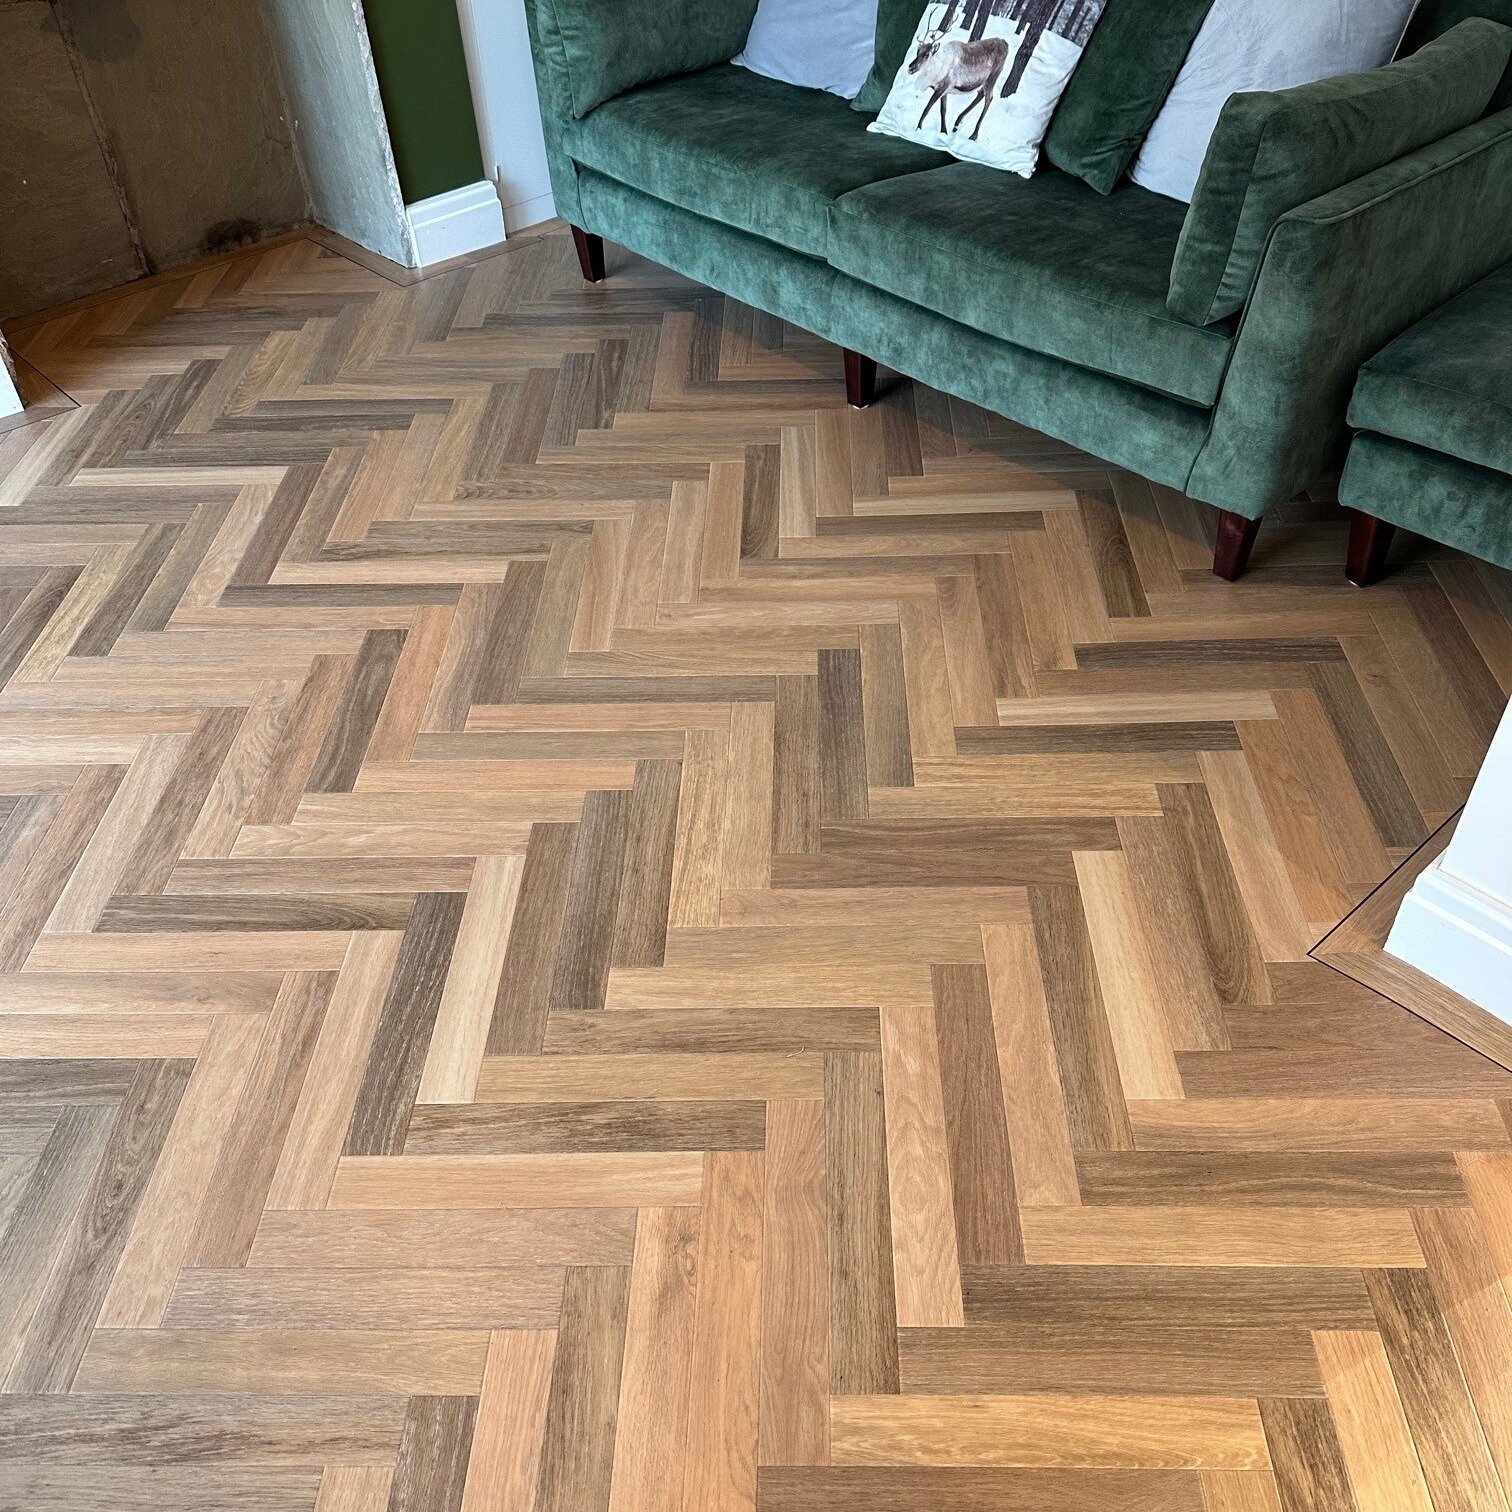 Prairie Oak presents a beautiful array of pale earthy browns. The lighter shades offer a stylish modern alternative to traditional oak flooring without losing the detail in the grain. 

📸 Art Select ~ Prairie Oak SM-RL20 - Fitted by us last week 😍?